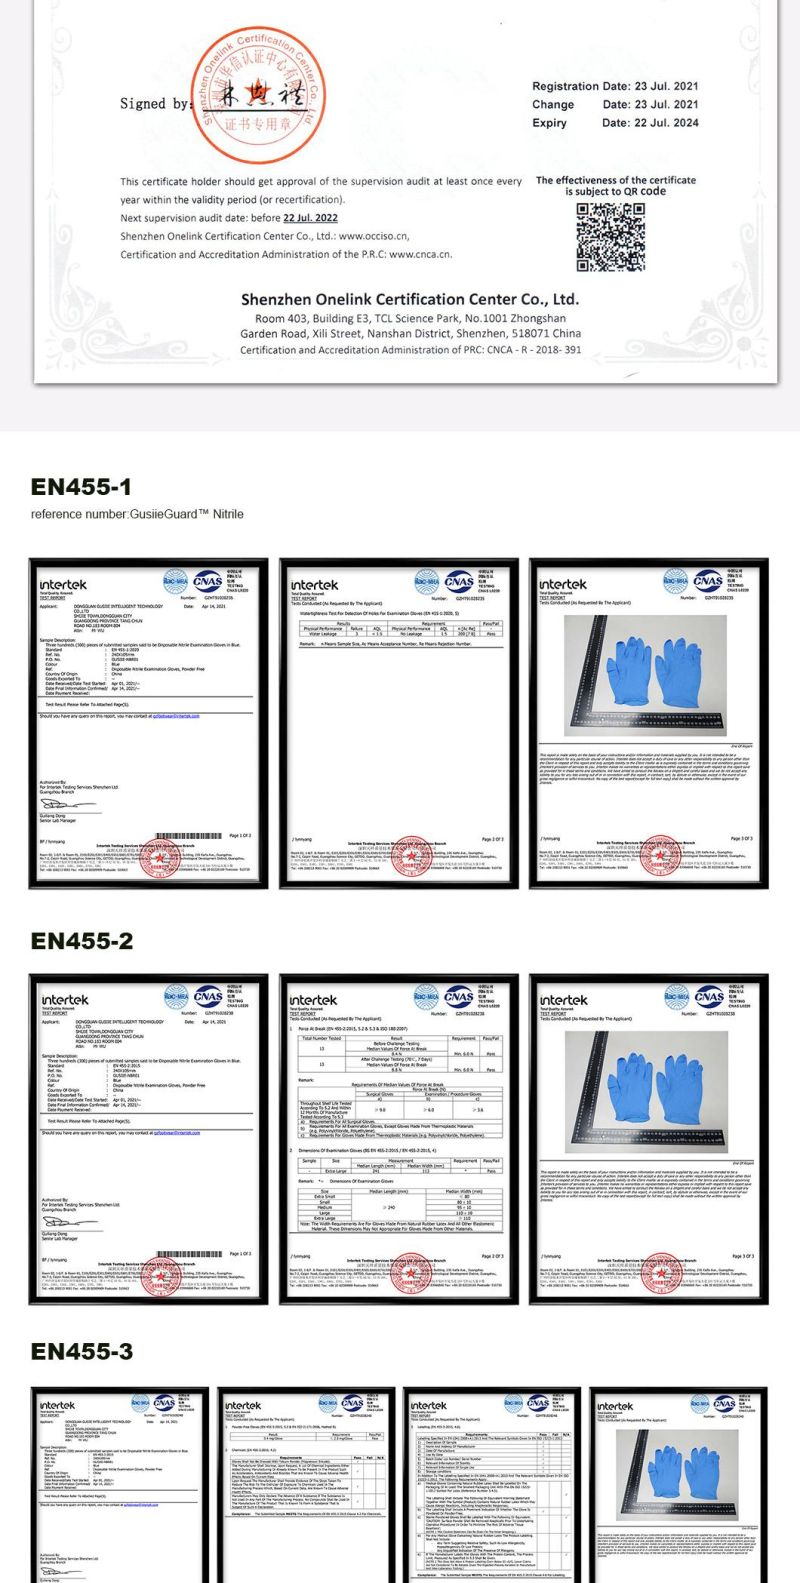 Factory Price Disposable Medical Examination Powder Free Industrial Grade Gloves Blue Fingers White/Blue Nitrile Gloves